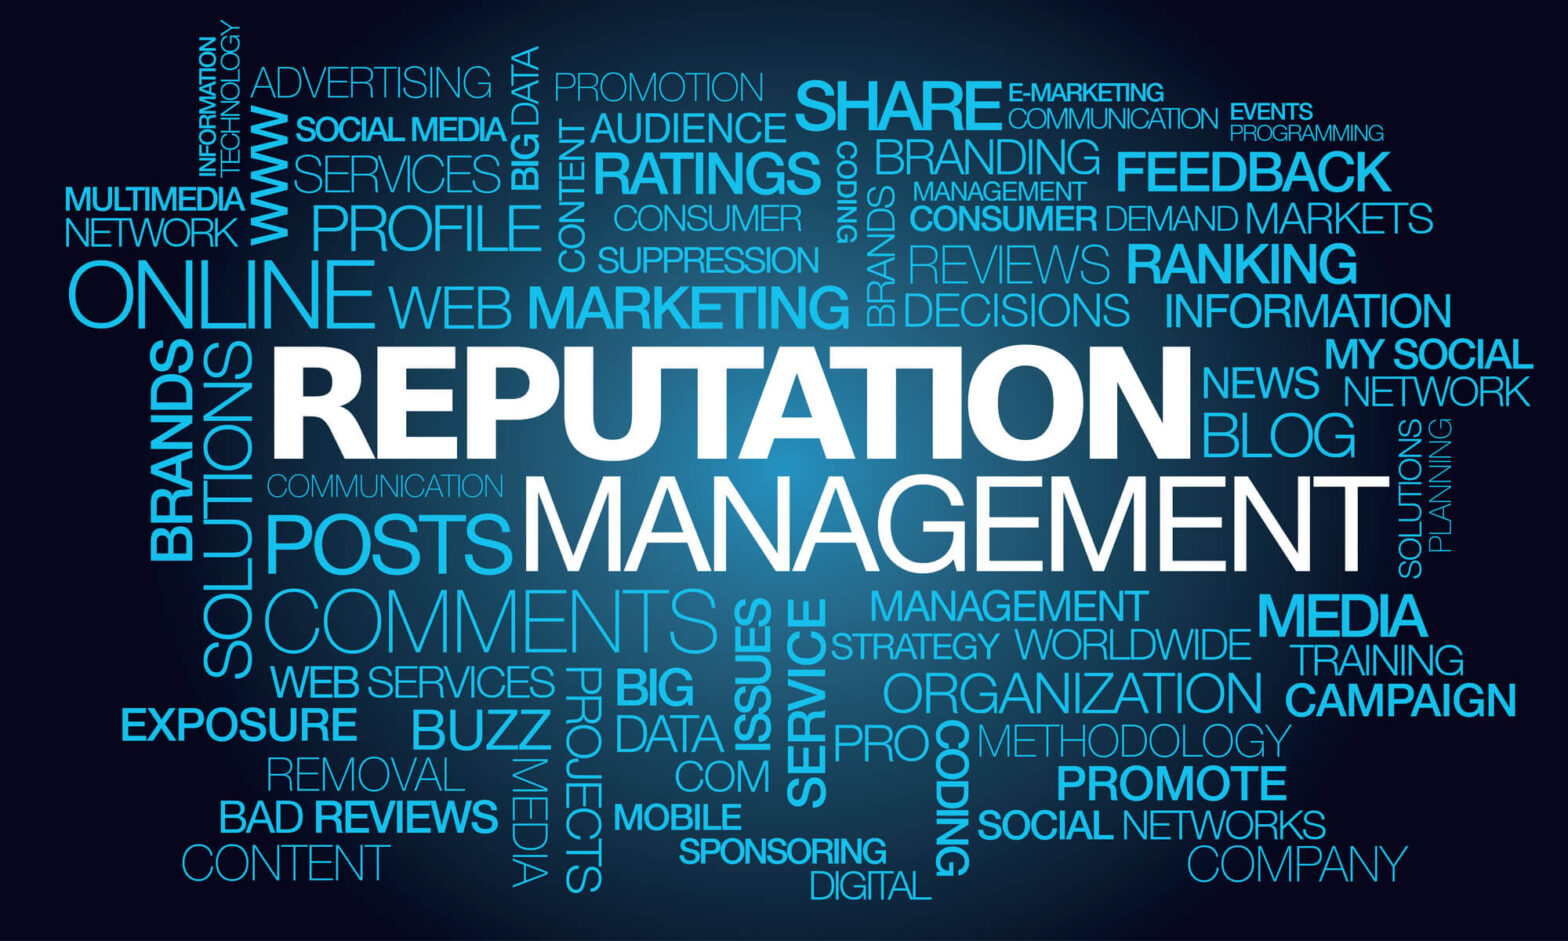 The power of positive online reputation management services for brands